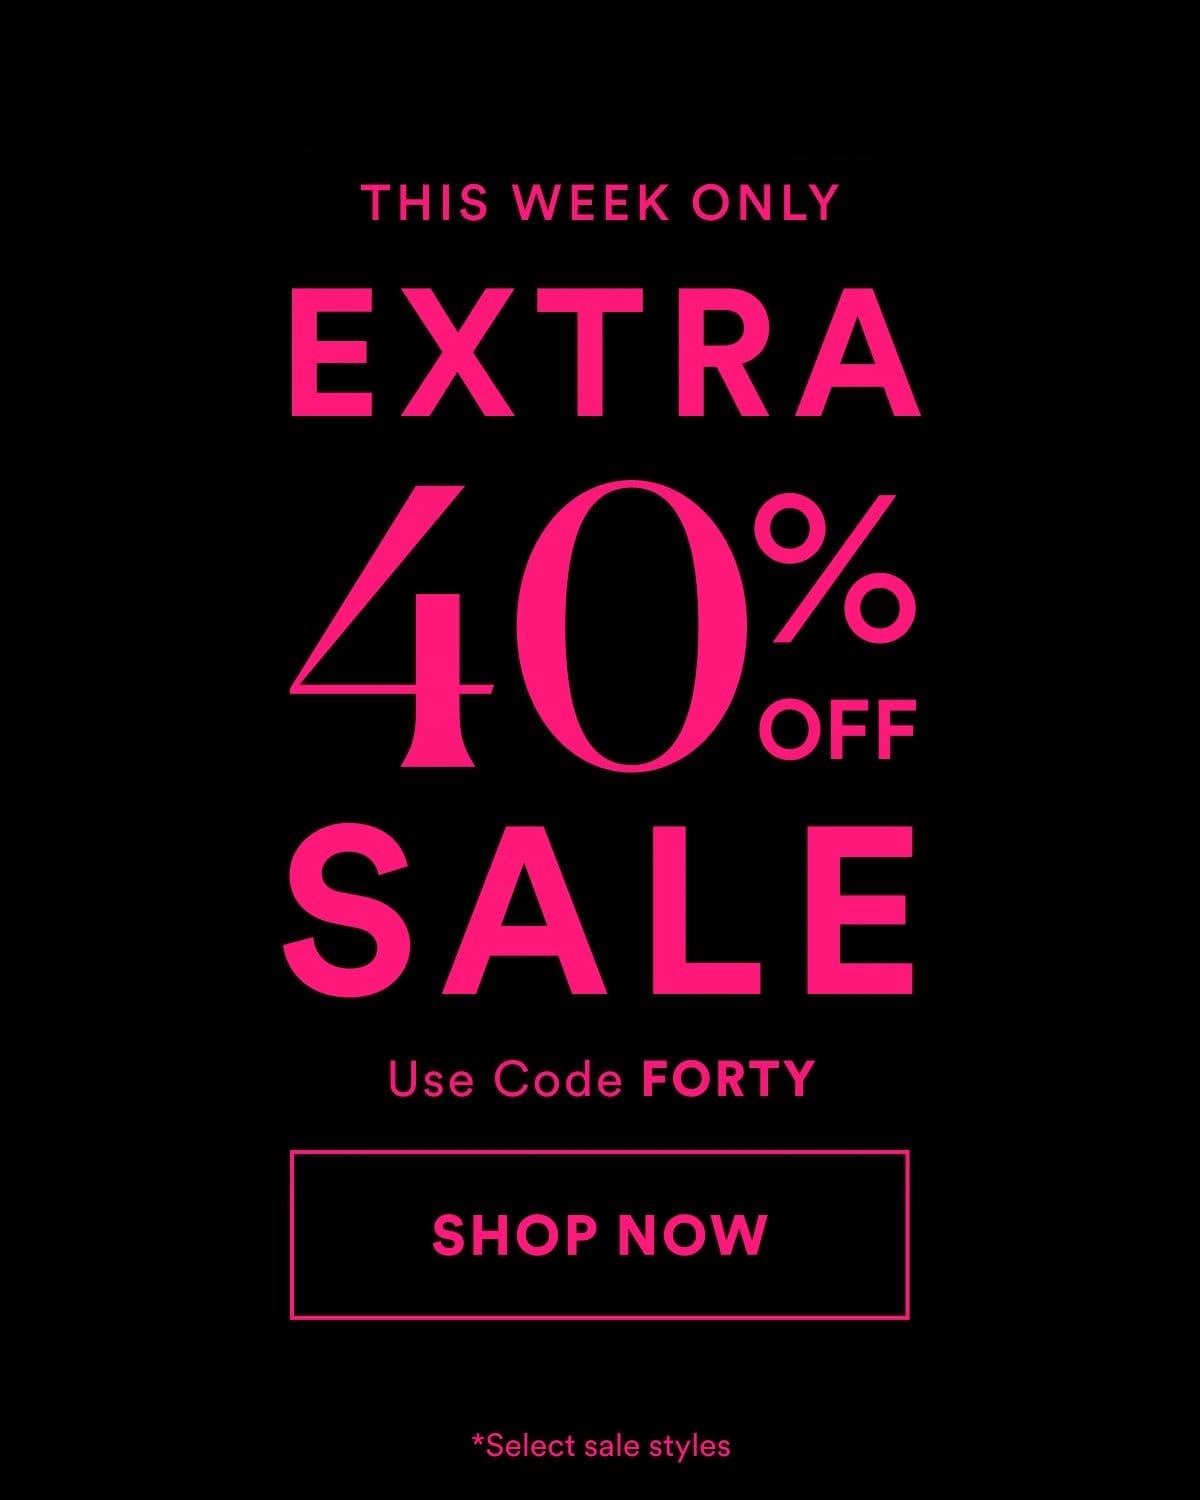 Winter Markdowns. Extra 40% Off with code FORTY. Prices as low as \\$15. Shop The Sale